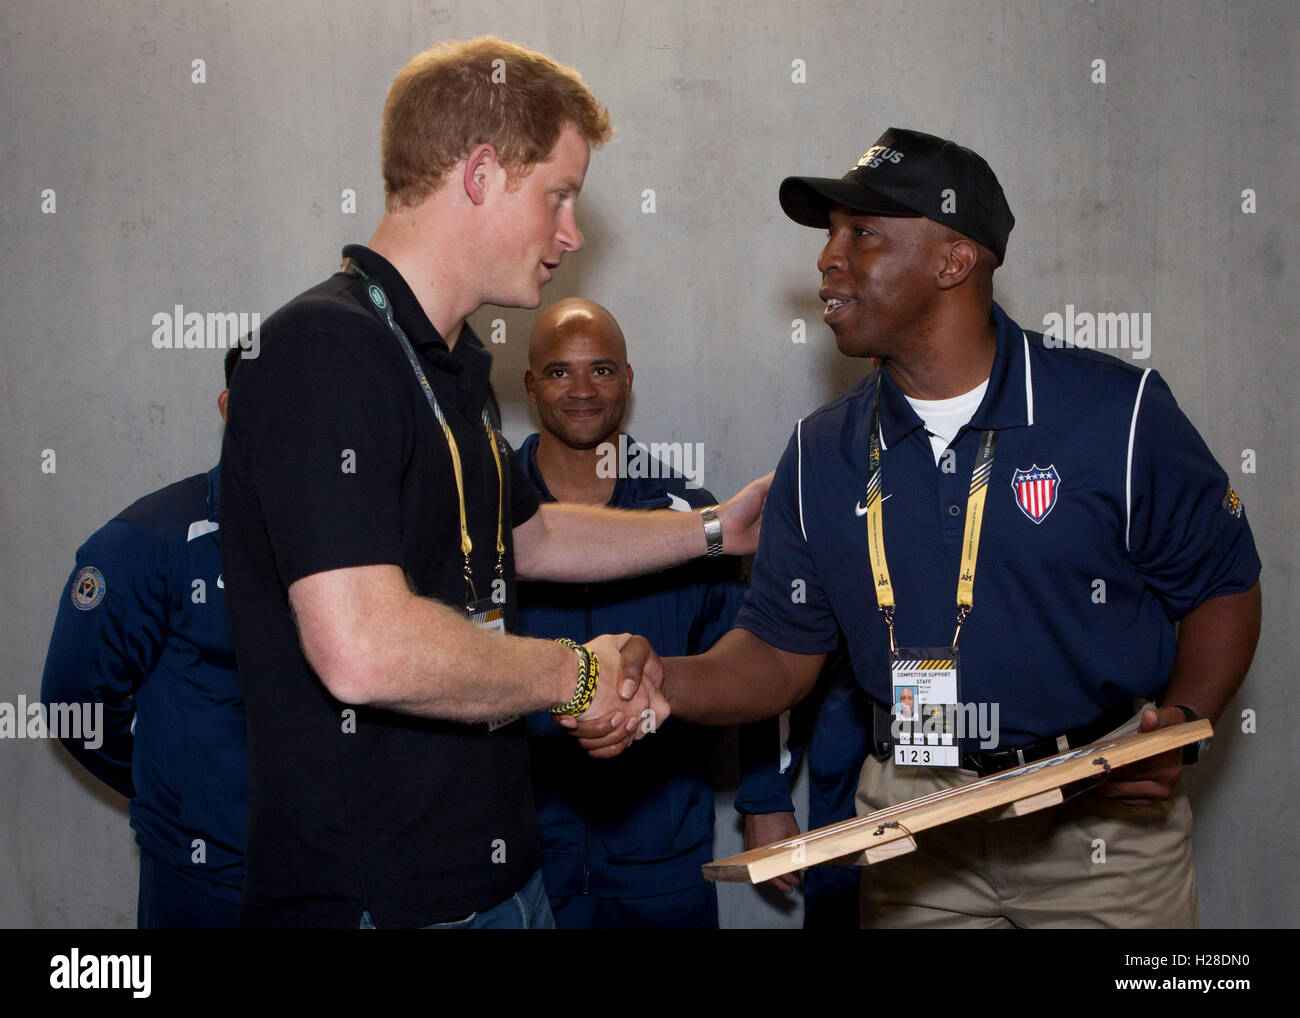 U.S. Marines Sgt. Maj. Michael Mack greets Prince Henry of Wales during the 2014 Invictus Games September 14, 2014 in London, England. Stock Photo